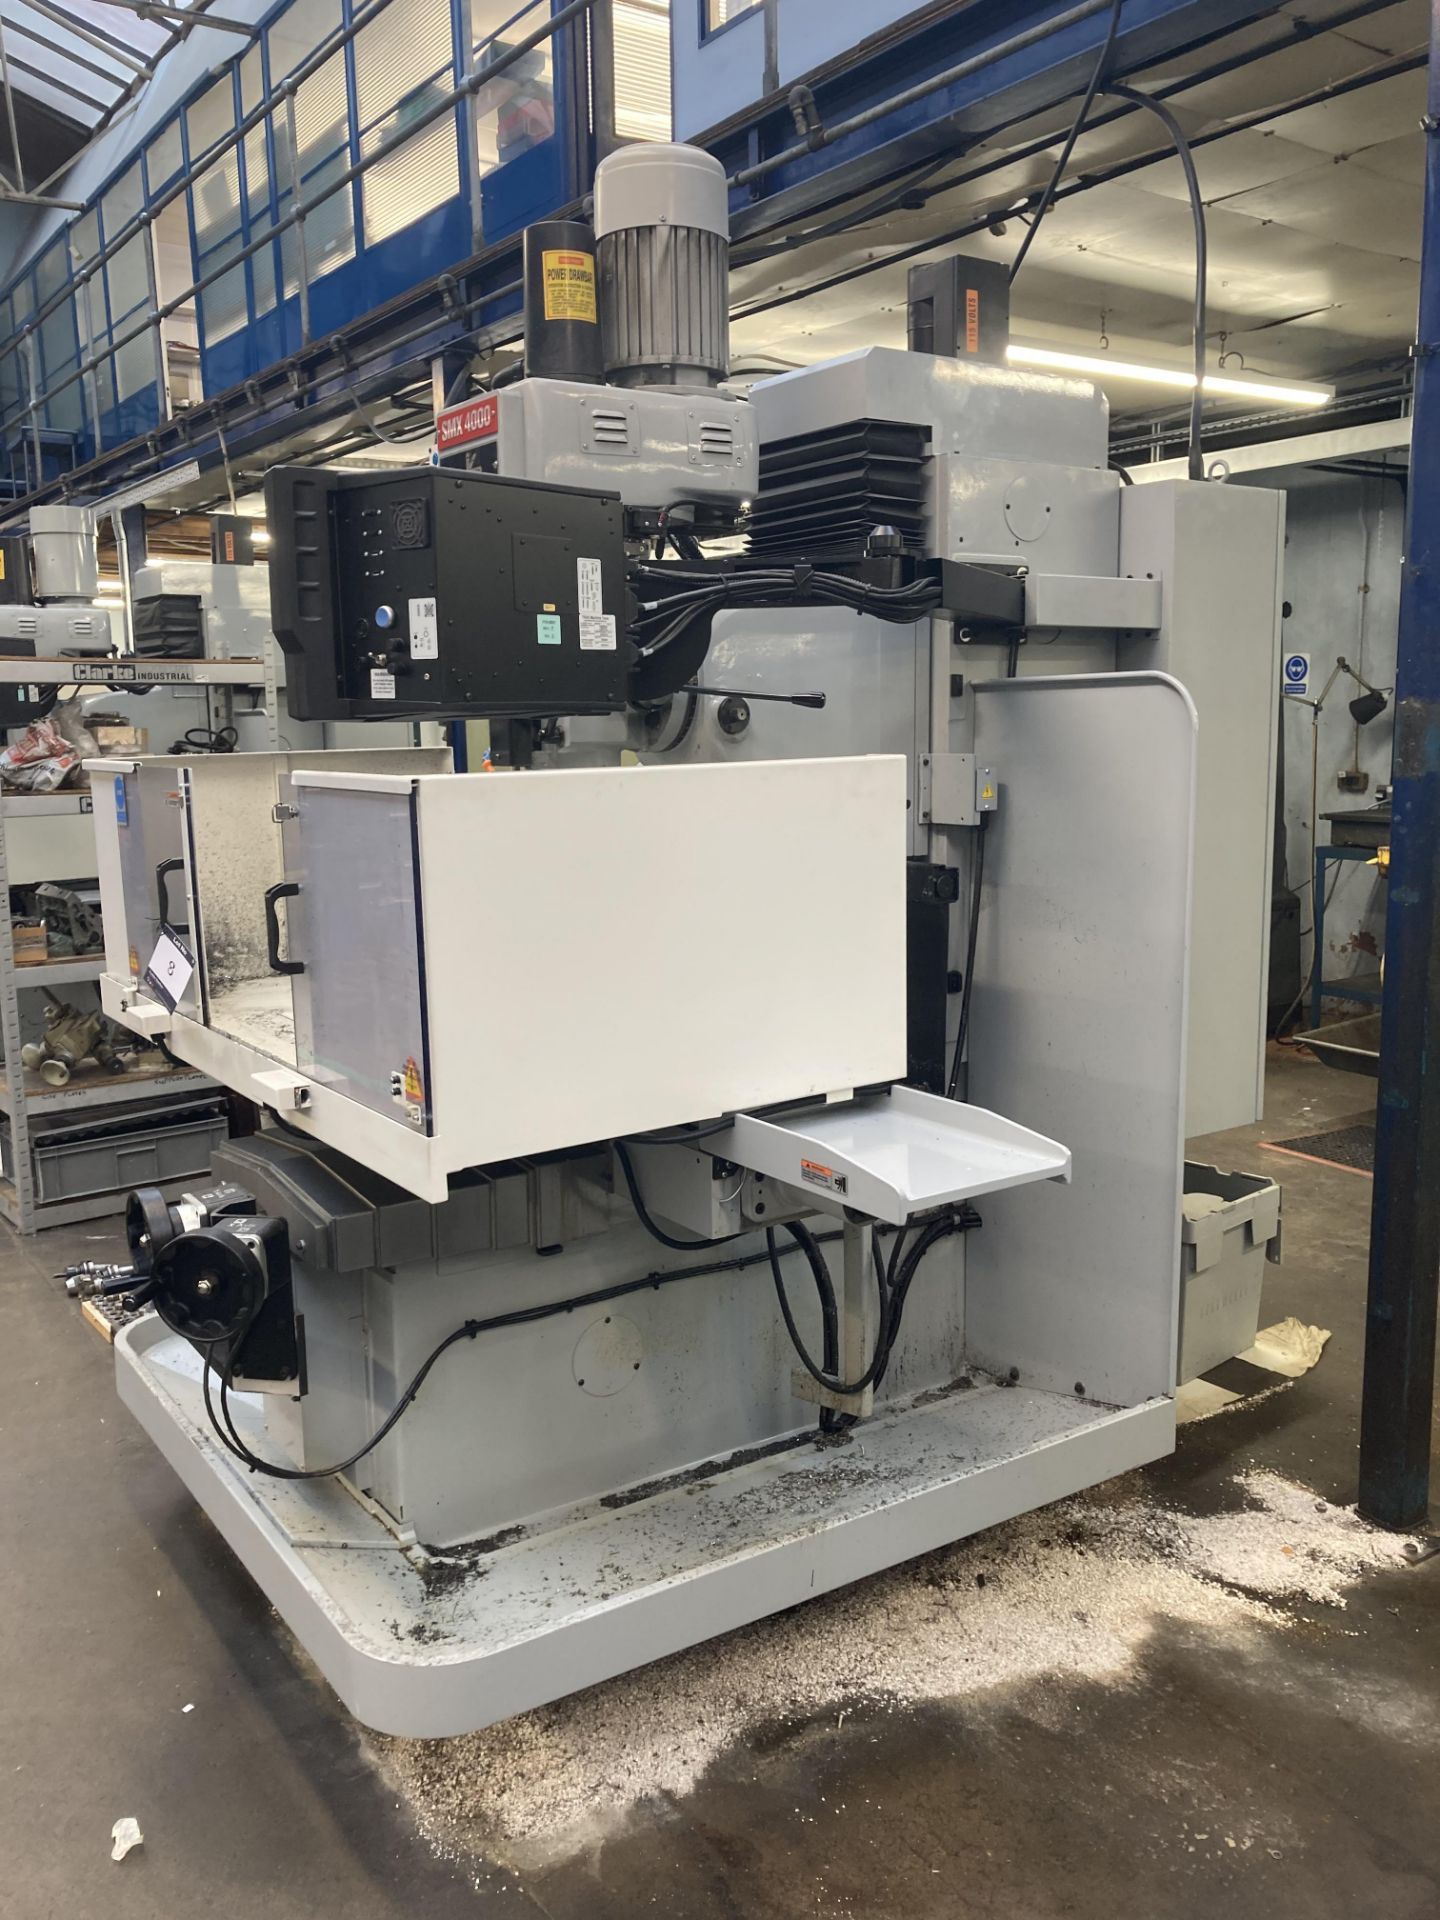 XYZ SMX 4000 CNC 3 axis vertical bed milling machine, Serial No. 13119 (2019), table size 1474mm x - Image 4 of 7